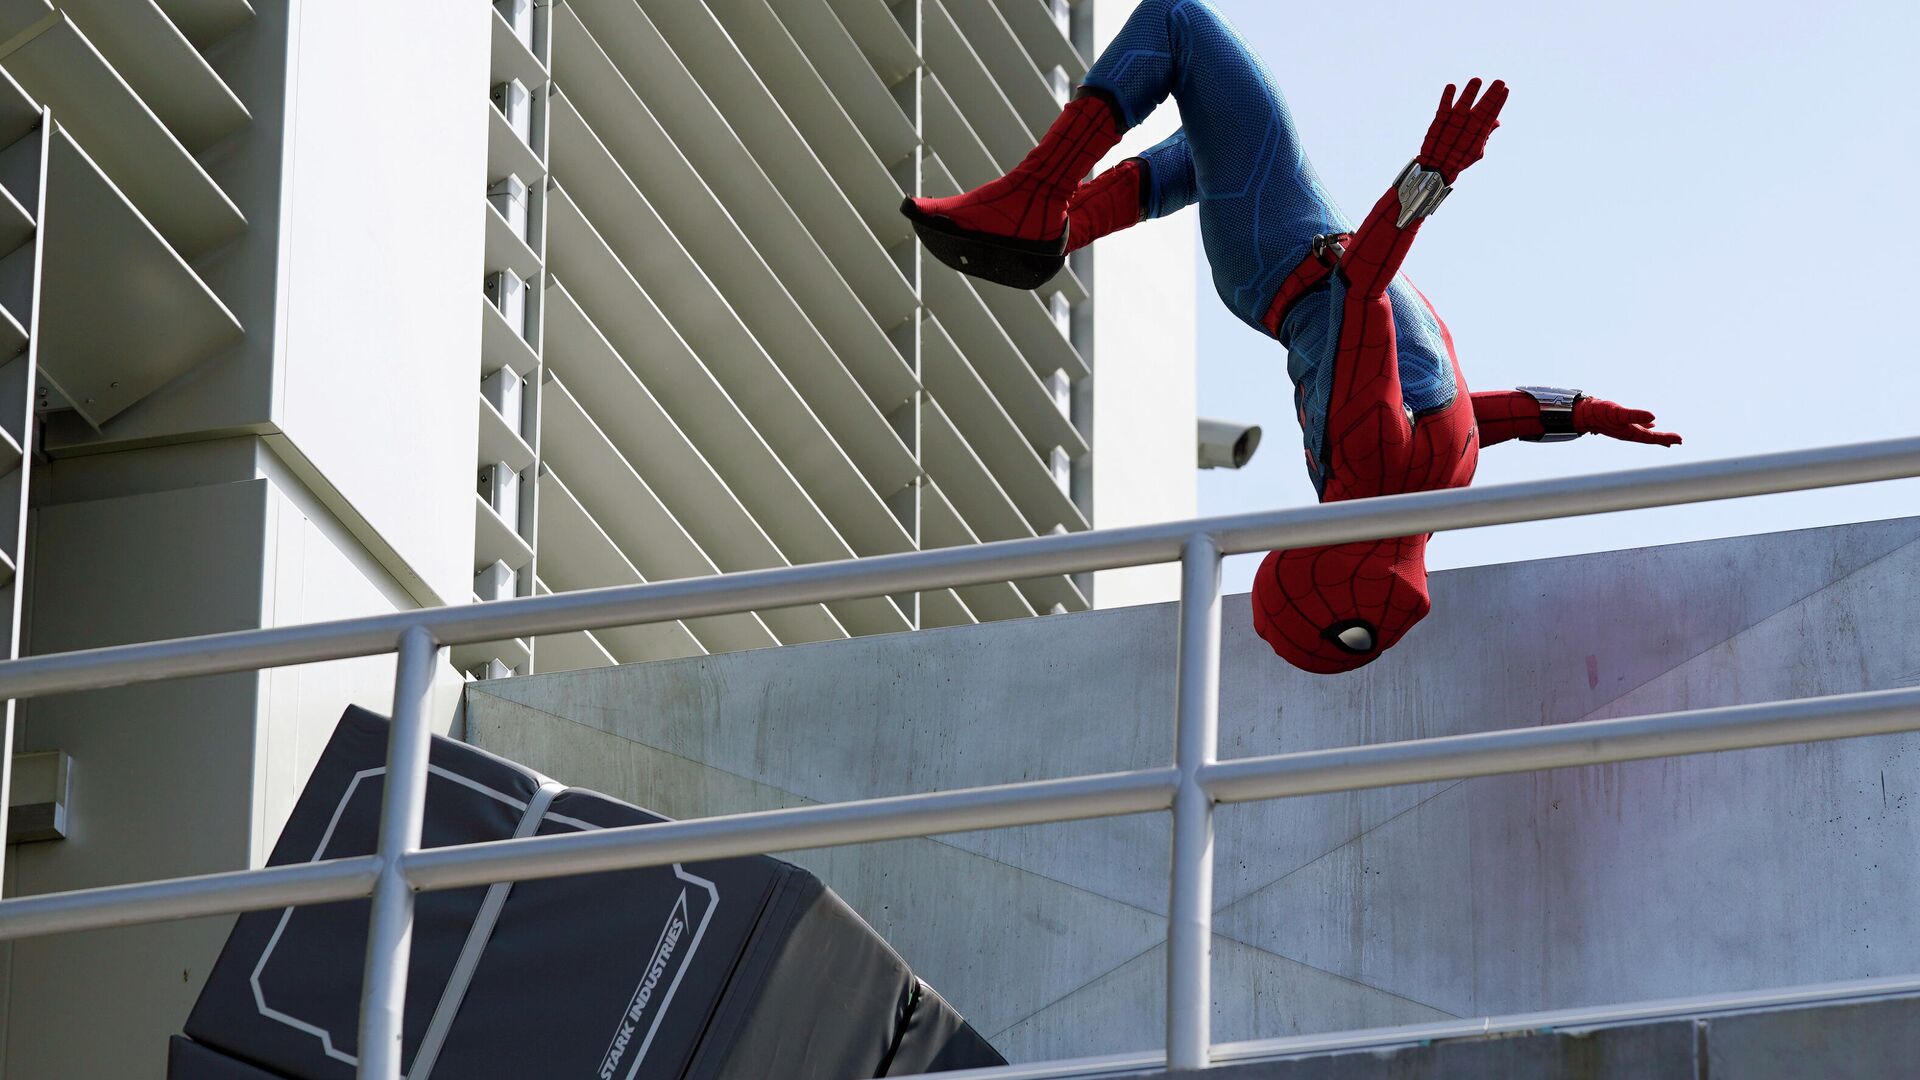 A Spider-Man character performs during The Amazing Spider-Man! show at the Avengers Campus media preview at Disney's California Adventure Park on Wednesday, June 2, 2021, in Anaheim, Calif. - Sputnik International, 1920, 16.01.2022